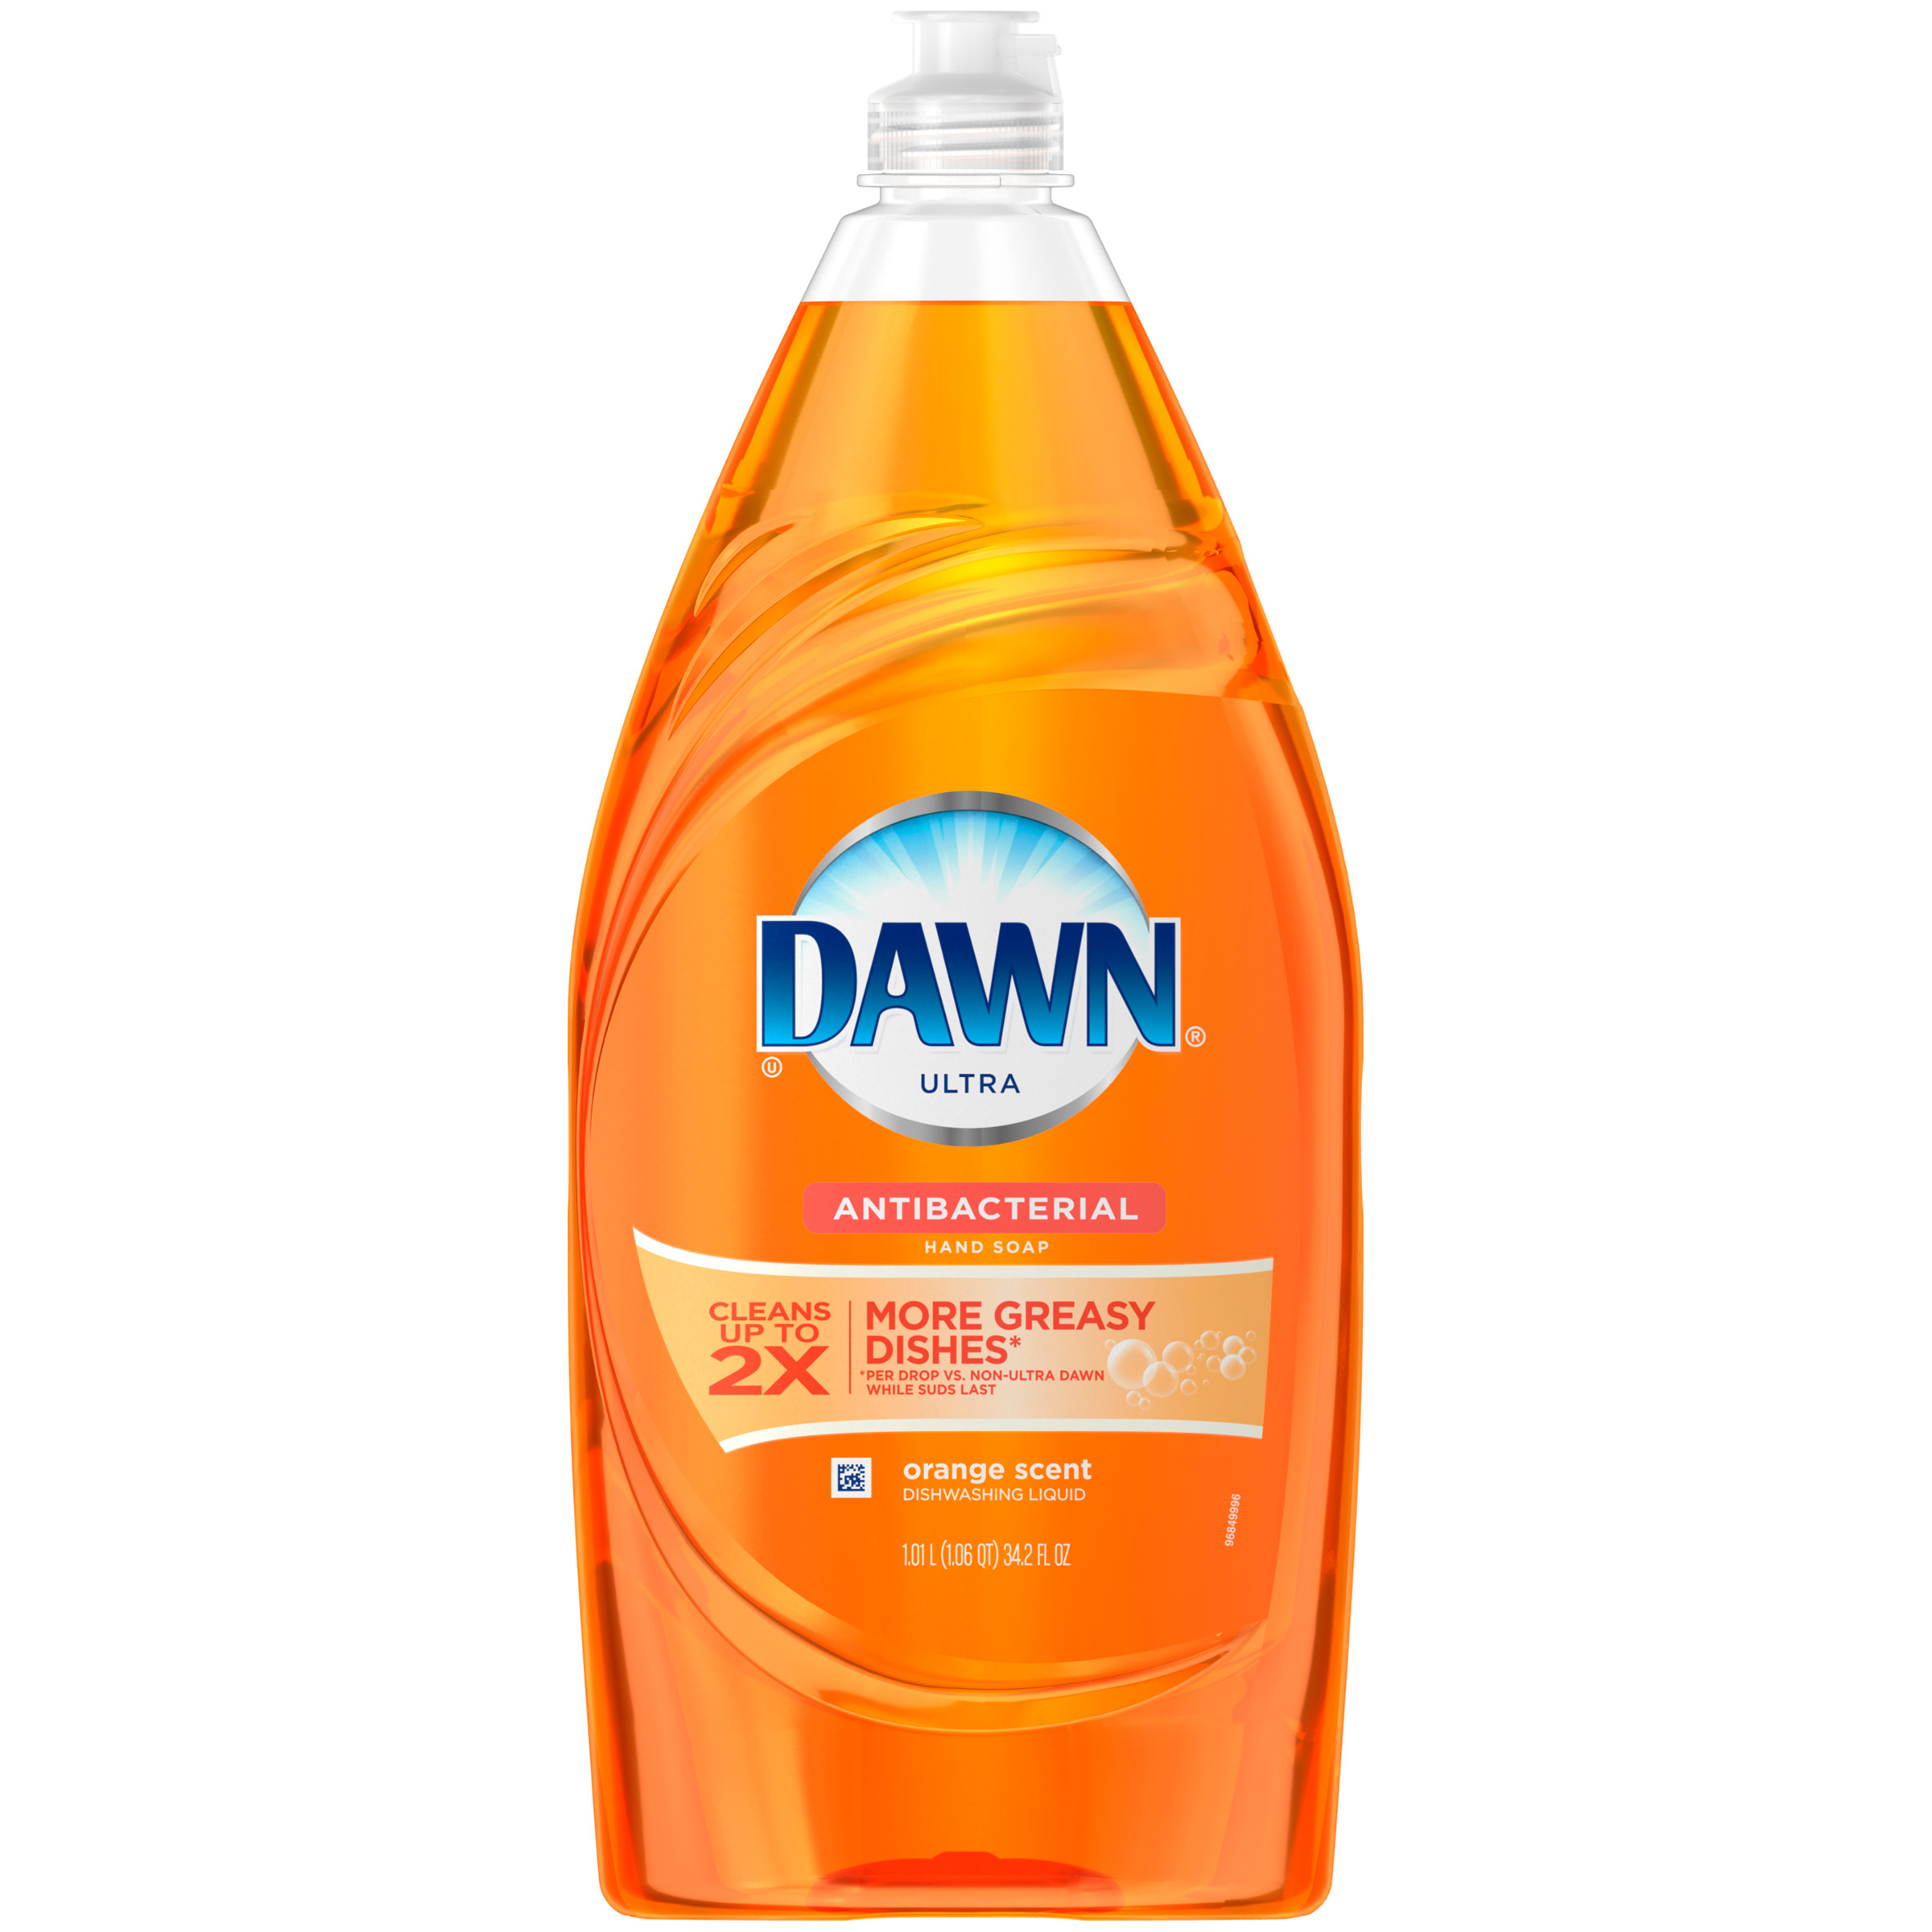 UPC 037000429067 product image for Dishwashing Liquid/Antibacterial Hand Soap, Ultra Concentrated, Orange Scent, 38 | upcitemdb.com